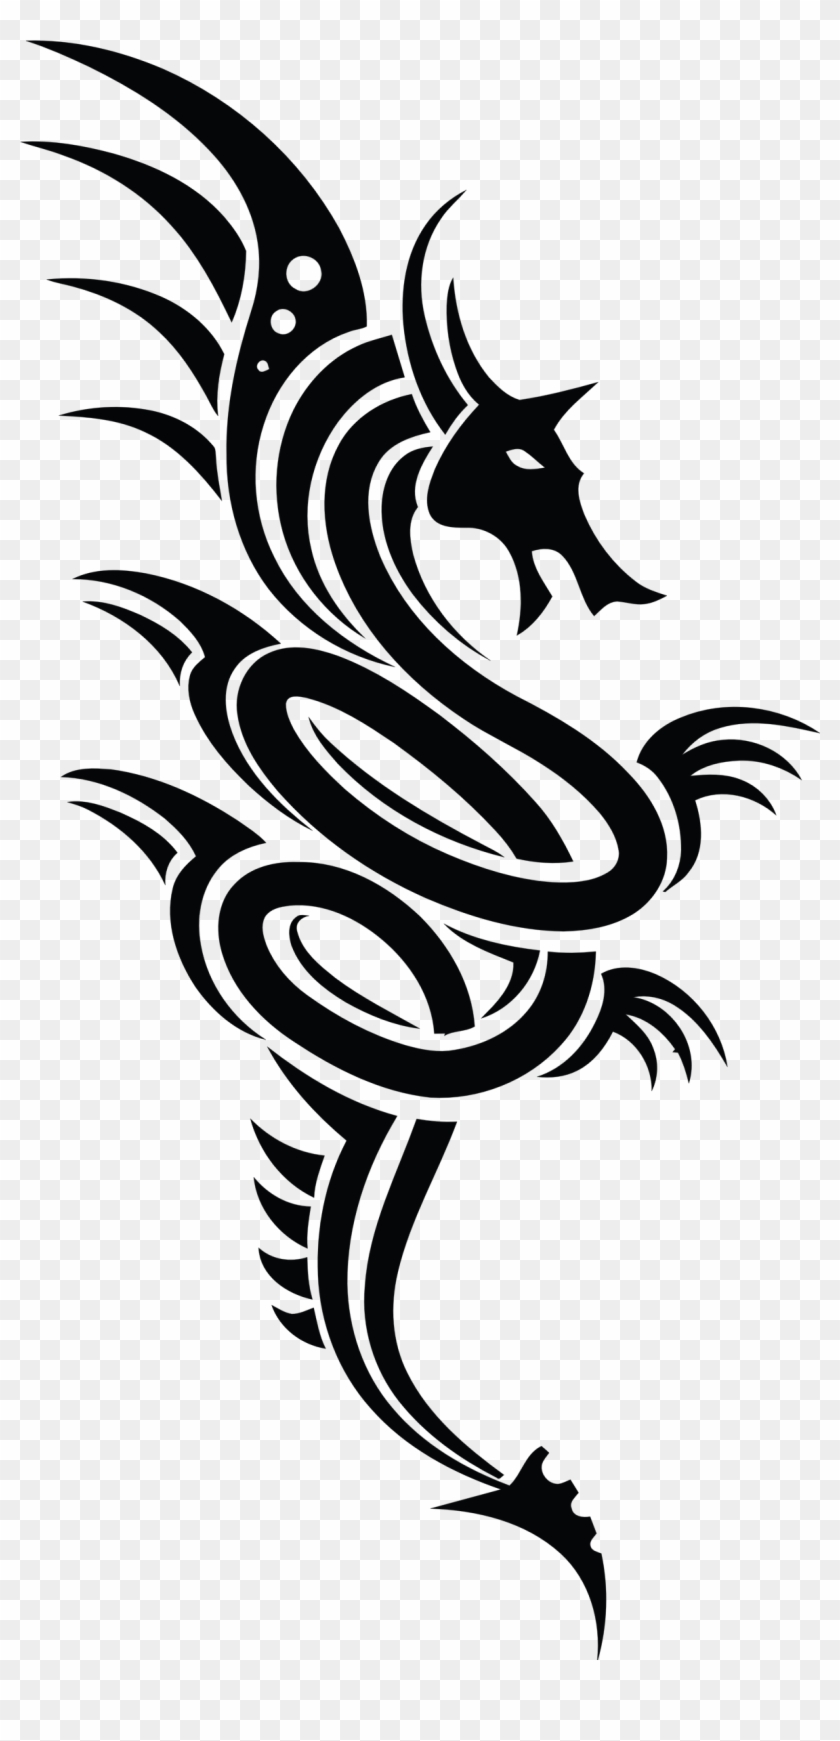 This Free Icons Png Design Of Tribal Dragon 2 - Hand Tattoo Pngs Hd,  Transparent Png - 1181x2392(#3466763) - PngFind